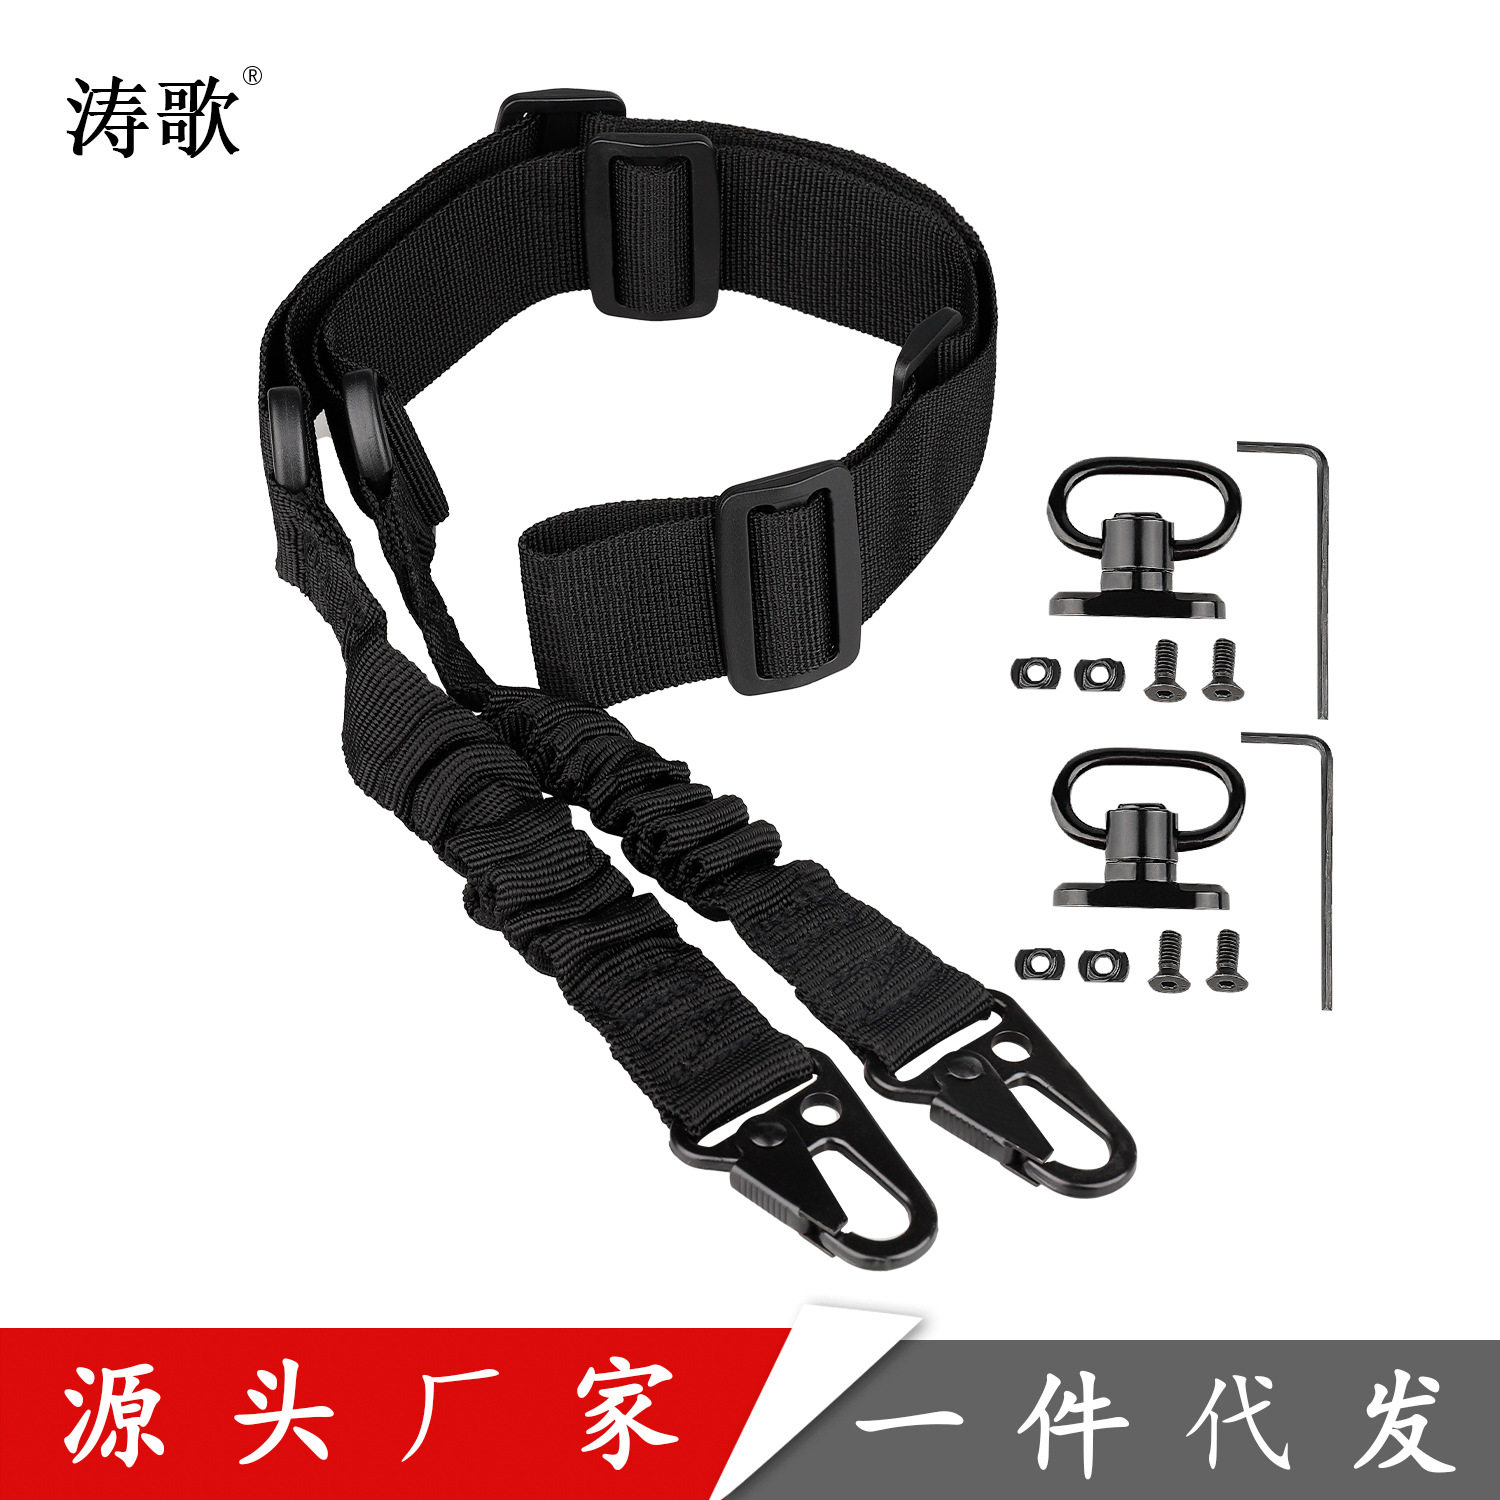 Amazon Specifically for straps Task multi-function tactics straps outdoors Mountaineering straps QD Buckle and add base